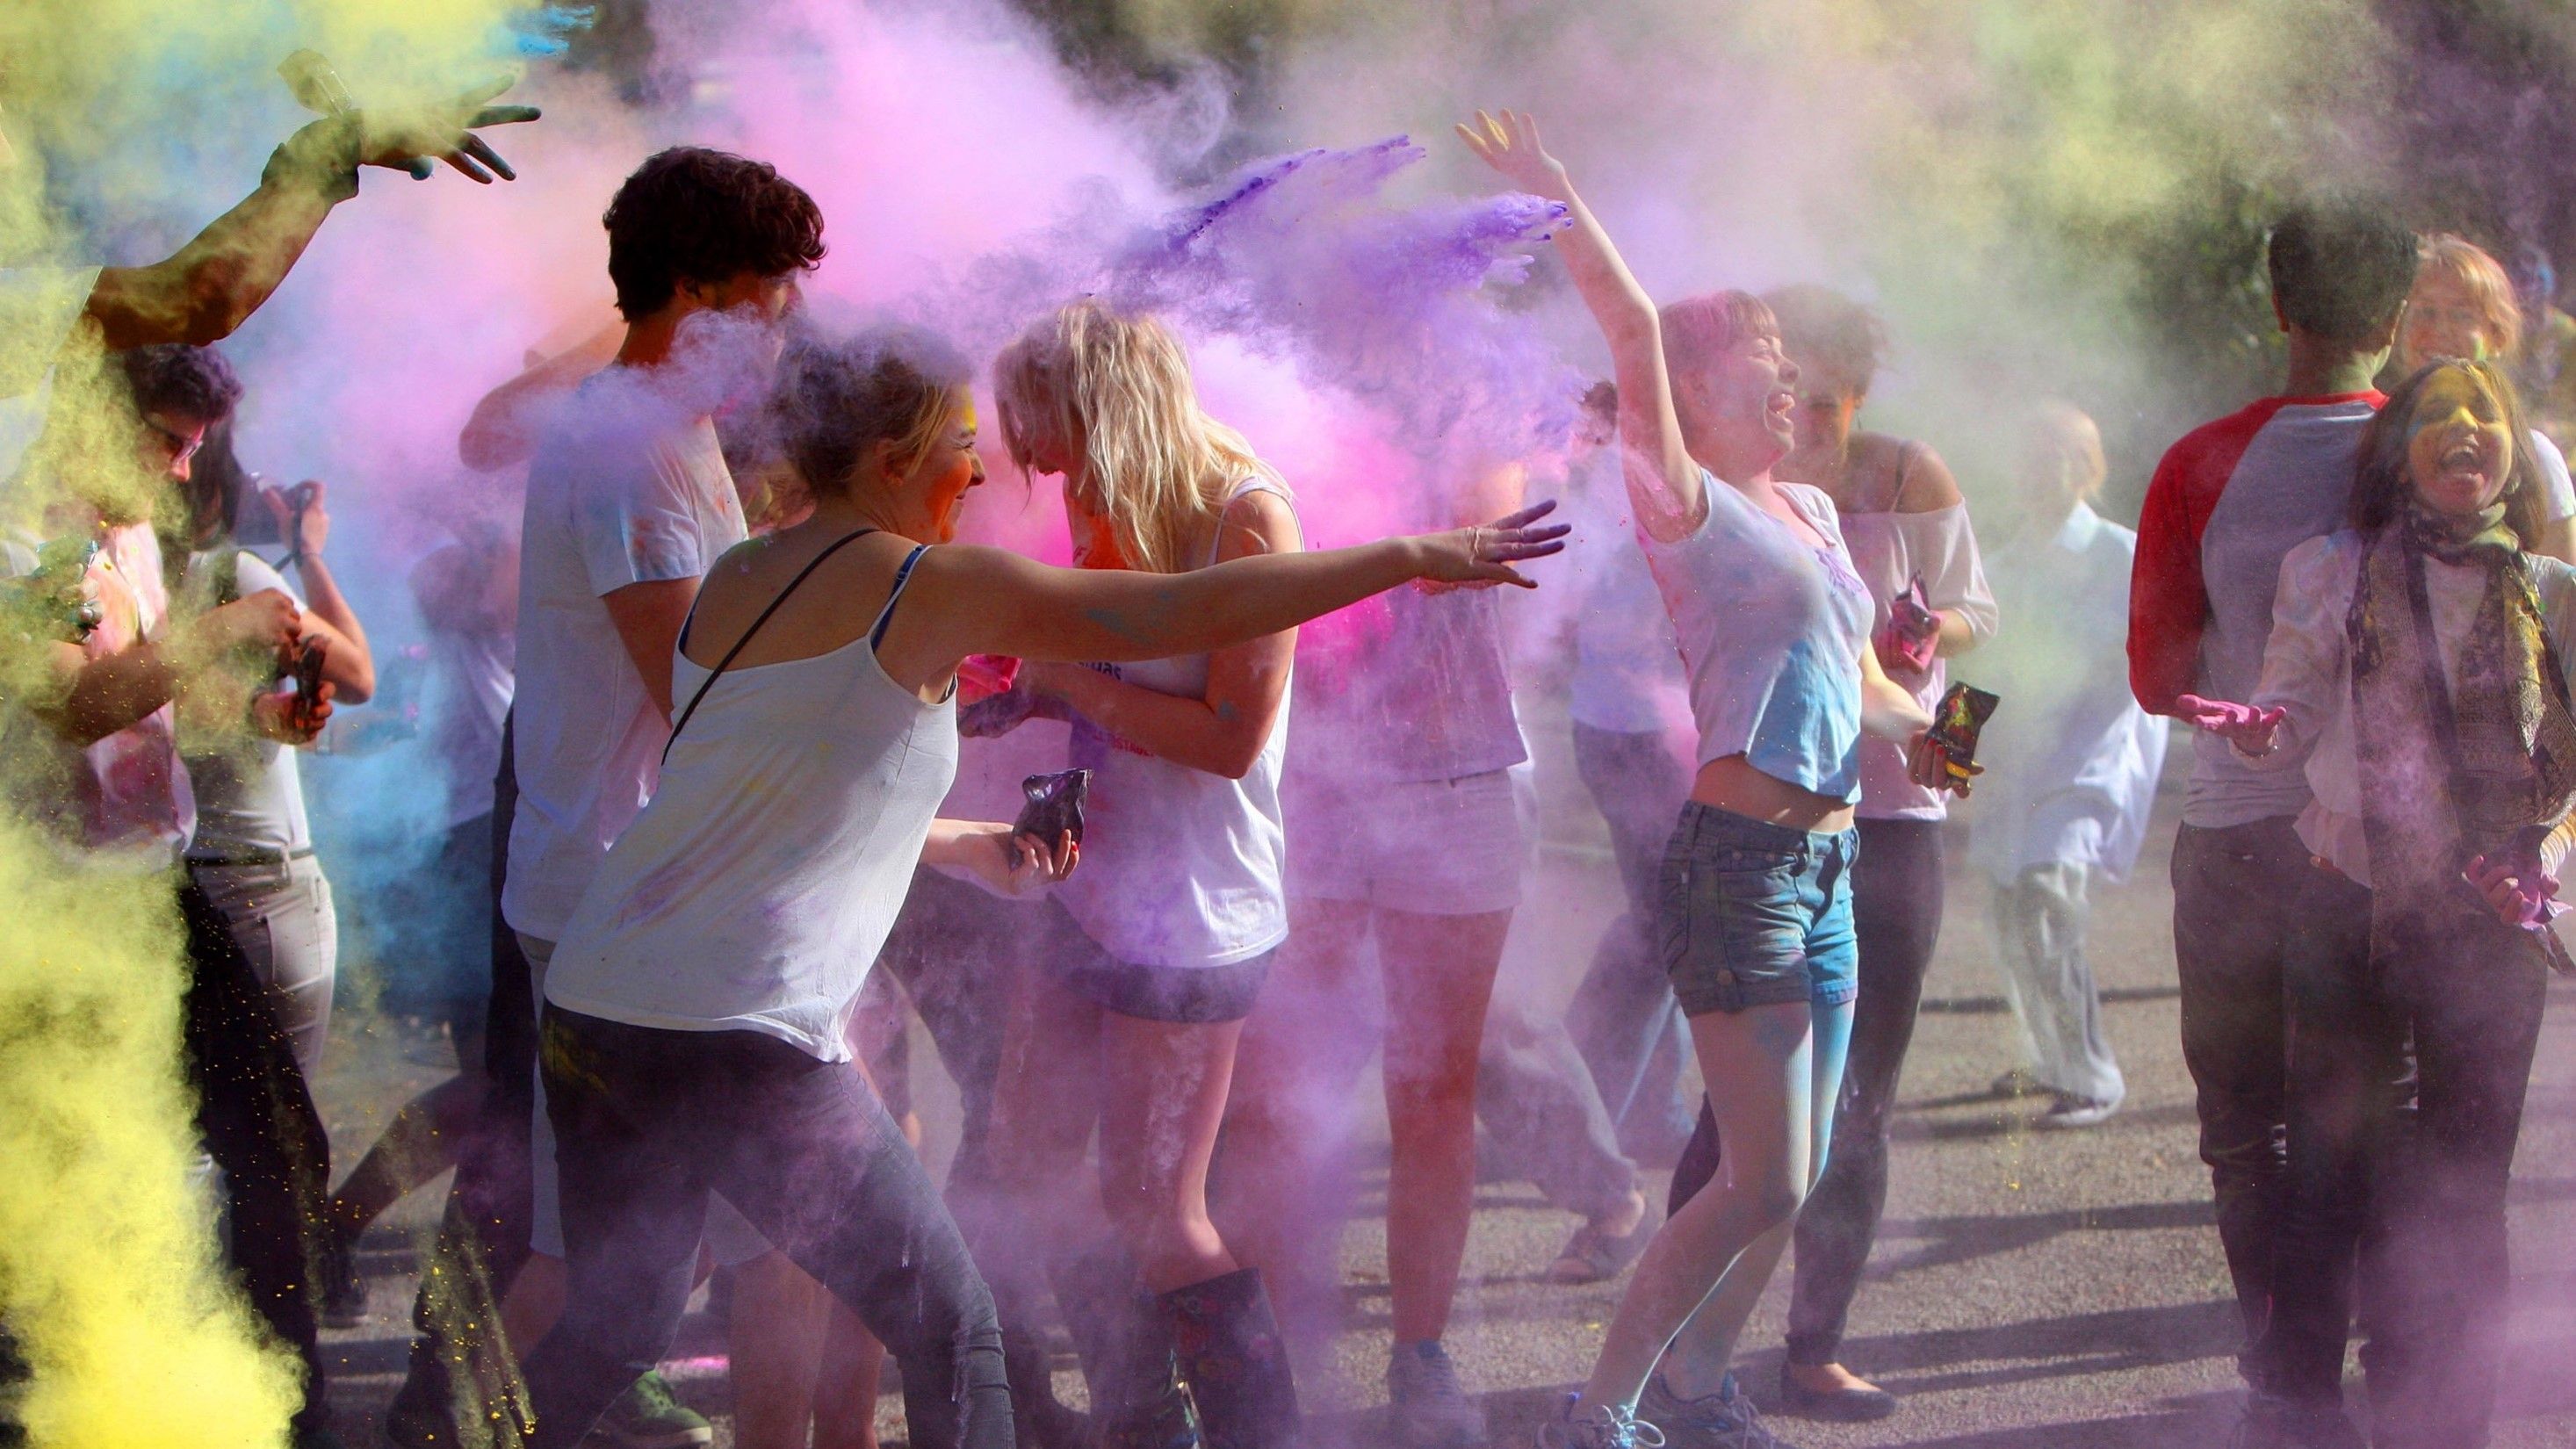 Students taking part in the Indian tradition of throwing coloured powder over each other during Holi Festival